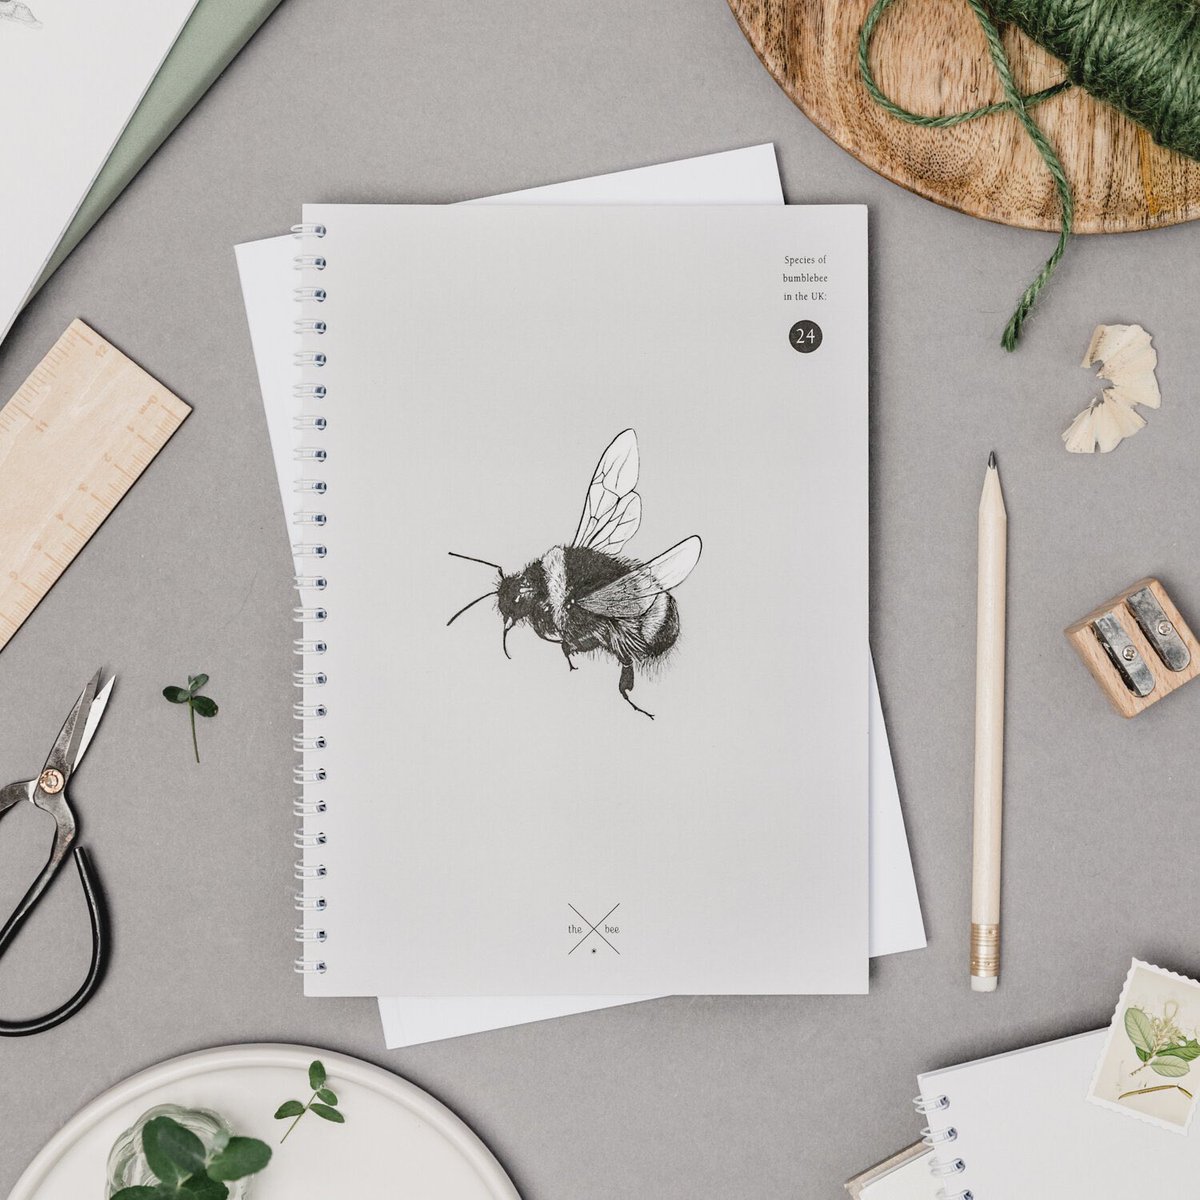 Our notebooks are now only £5 and make perfect stocking fillers. Plus 10% is donated to the wildlife charities we support. creaturecandy.co.uk/notebooks-line… #wildlifenotebook #batnotebook #beenotebook #hedgehognotebook #curlewnotebook